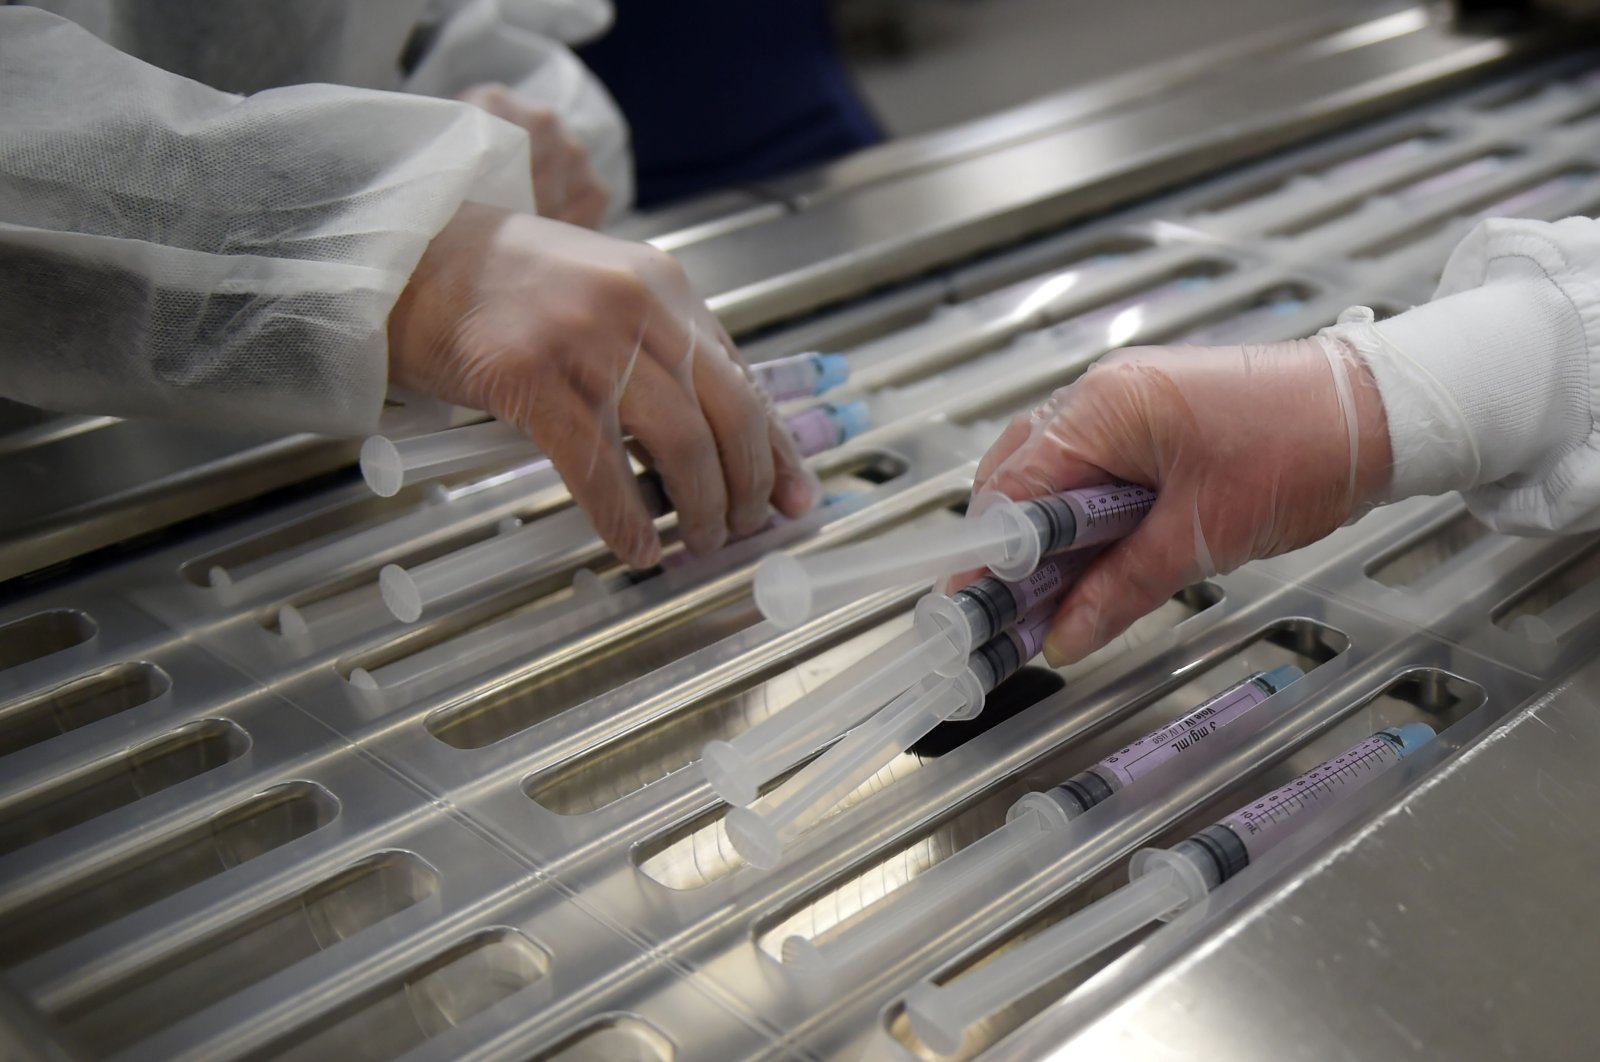 Employees check syringes on the production line of a new factory of pharmaceutical group Aguettant in Lyon, south-eastern France on May 4, 2016. (AFP Photo)